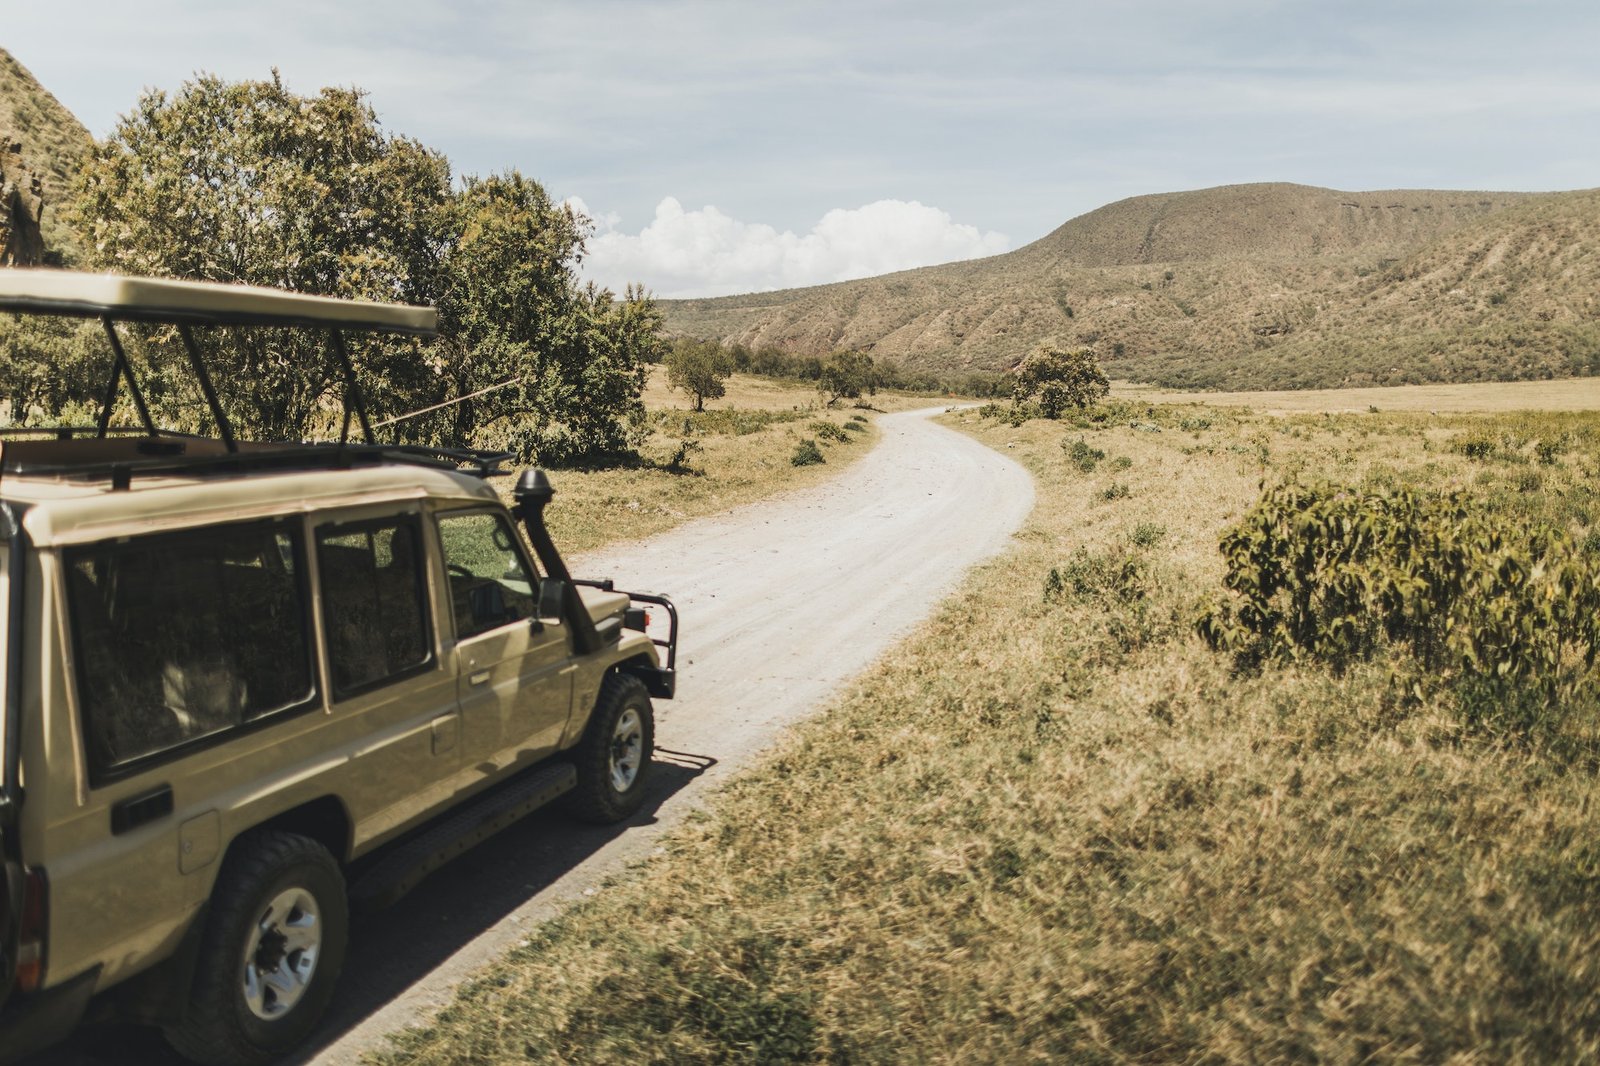 Safari in Hell's Gate national park in Kenya. Off road jeep car, savannah and mountain view